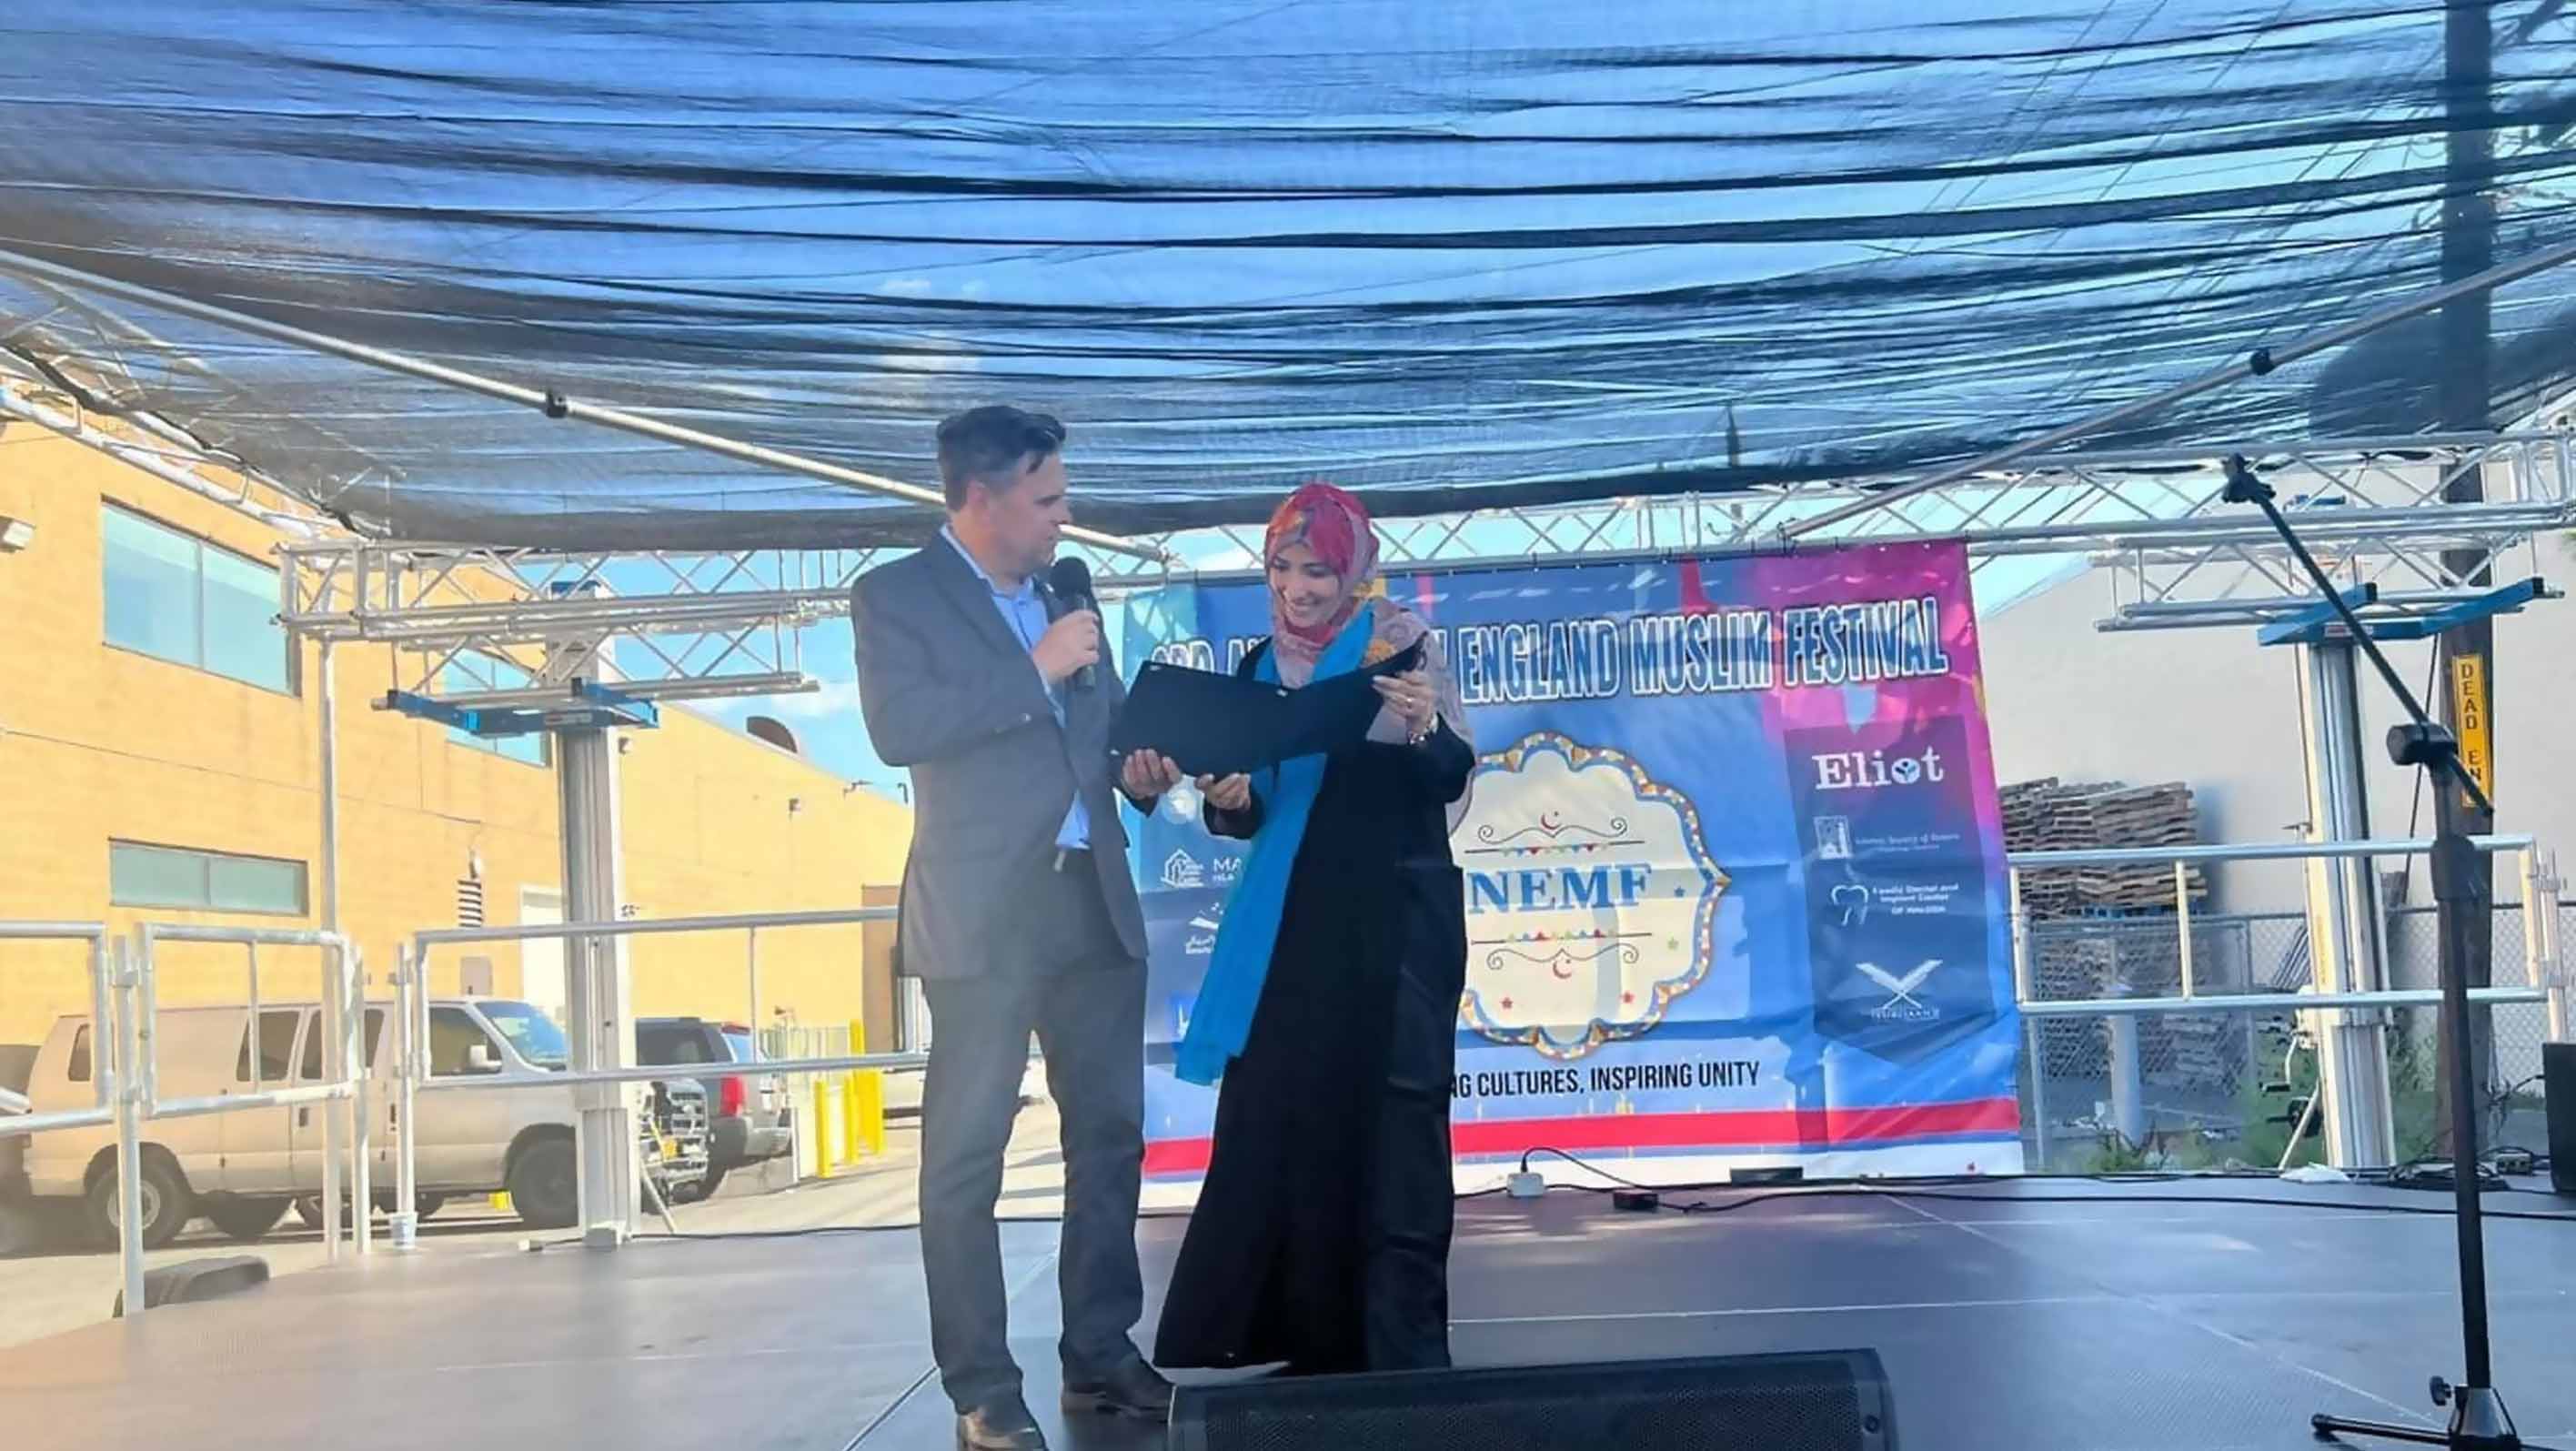 Malden City honors Tawakkol Karman for her advocacy in women's rights